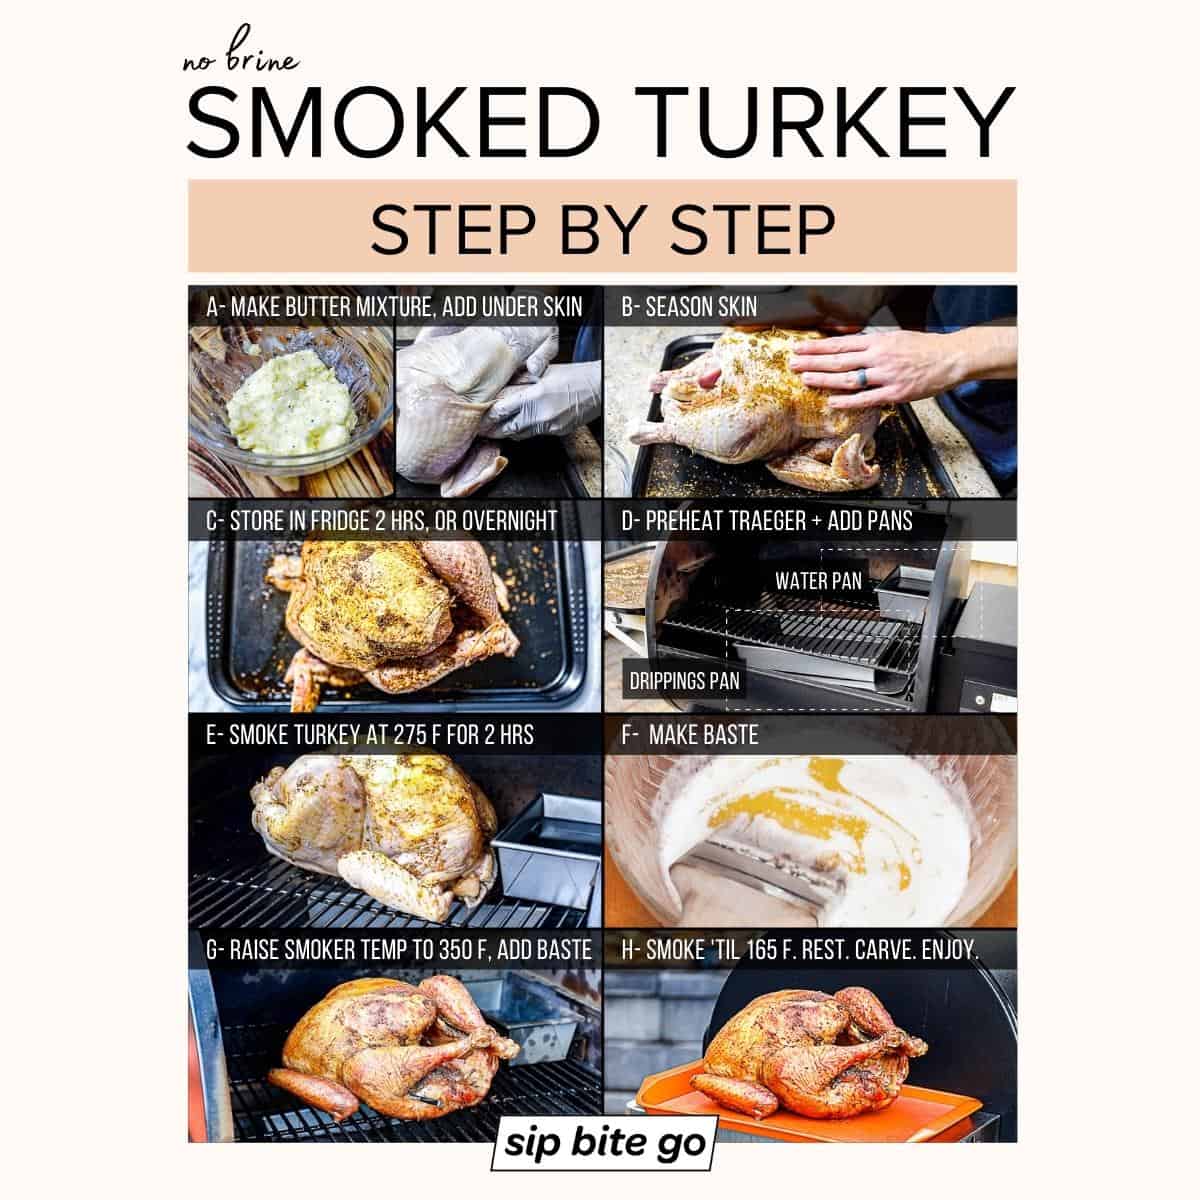 Infographic demonstrating how to smoke turkey step by step on a Traeger pellet grill